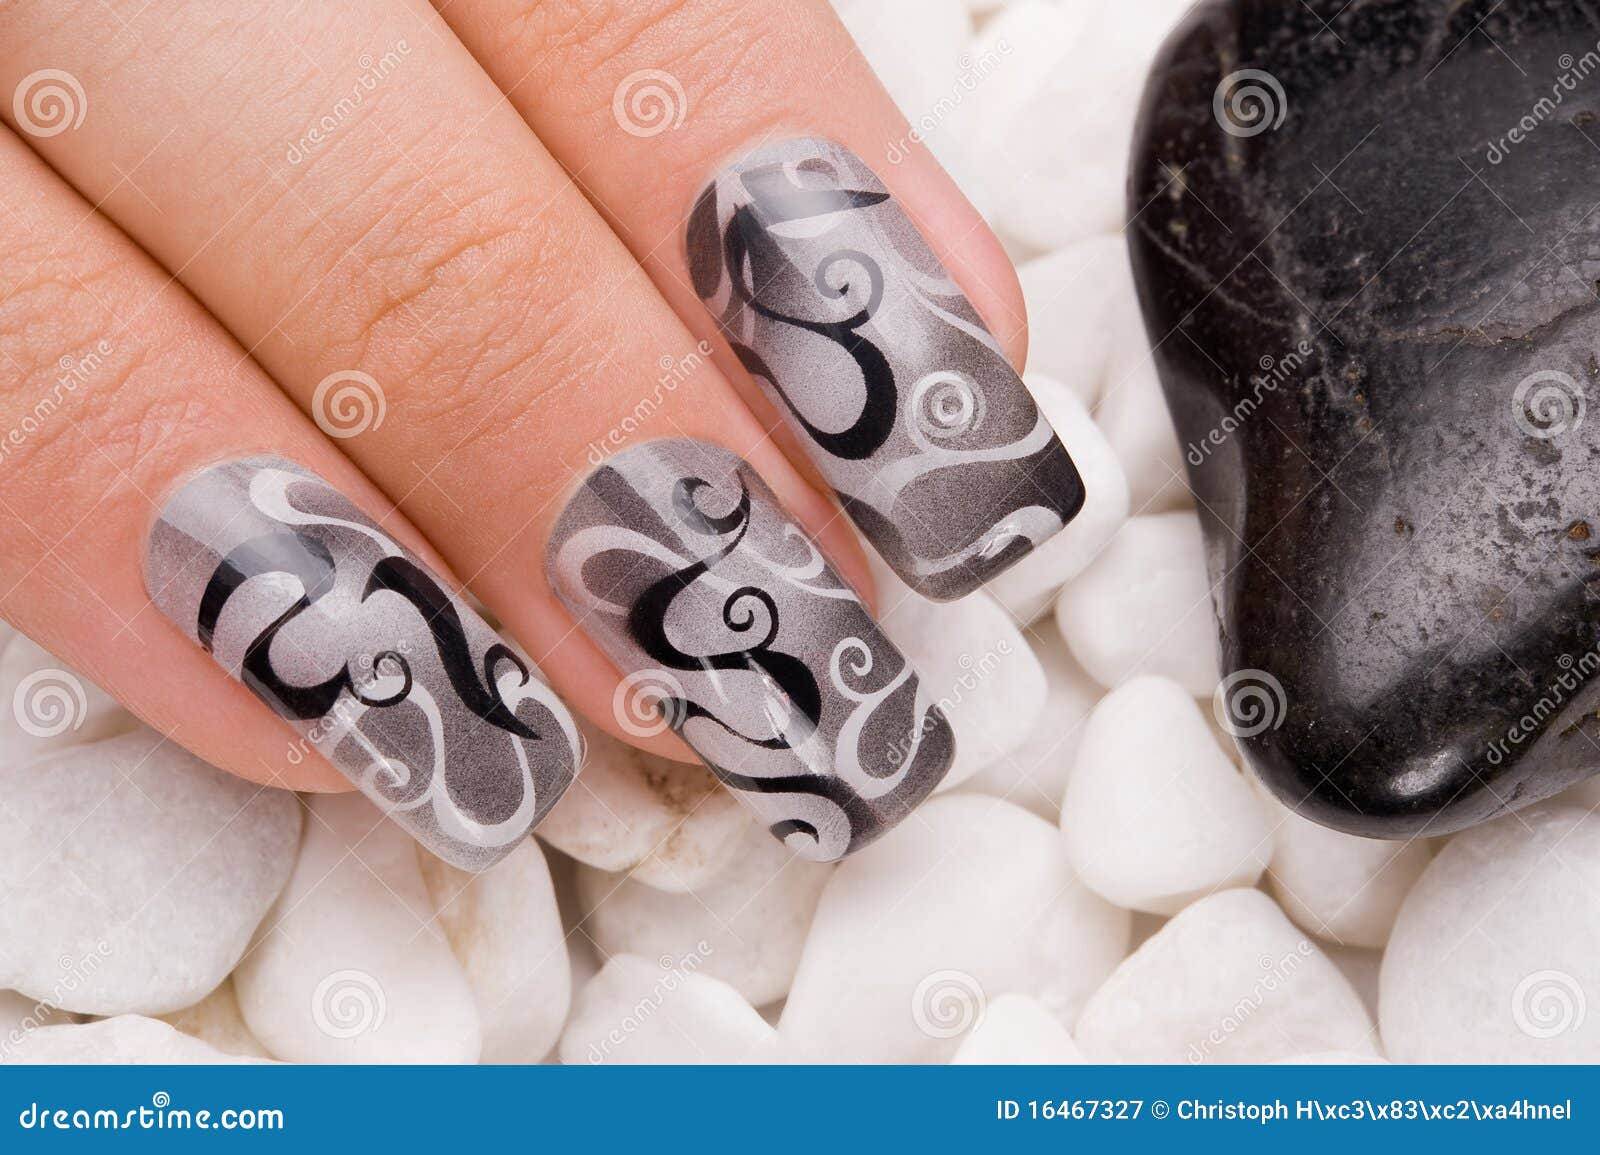 60+ Airbrush Nail Art Stock Photos, Pictures & Royalty-Free Images